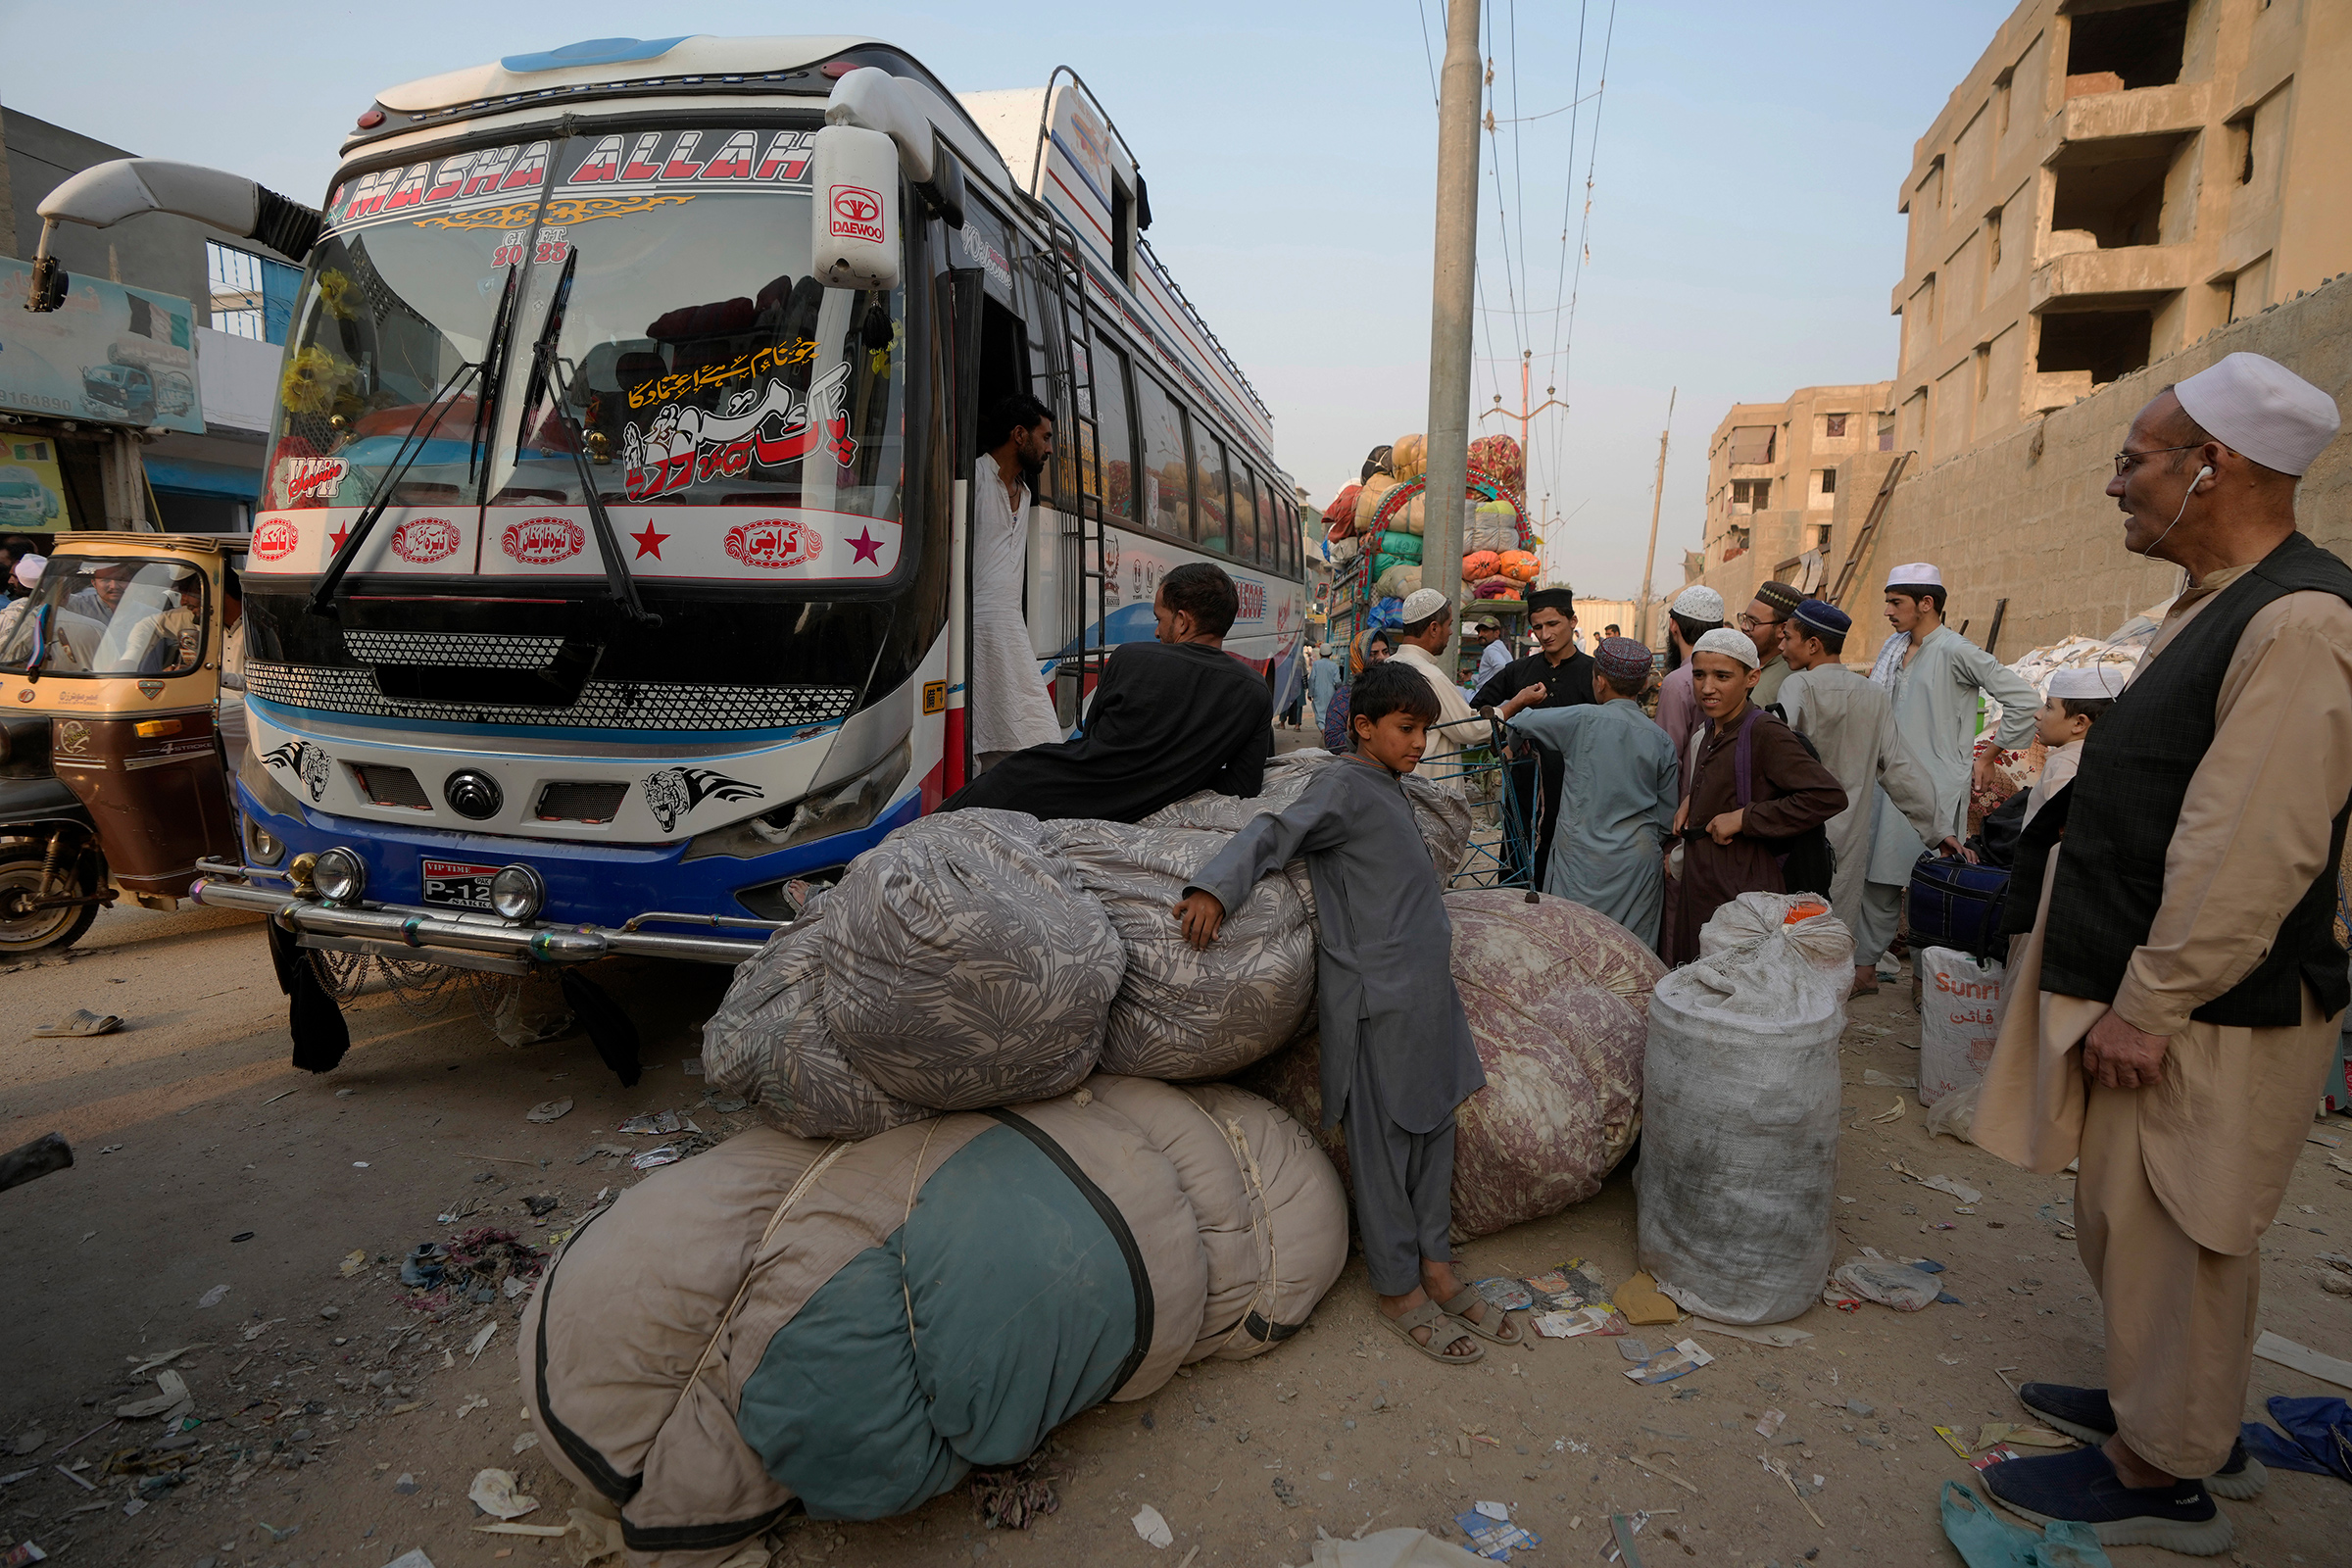 Afghan families wait to board in buses to depart for their homeland, in Karachi, Pakistan on Oct. 30.